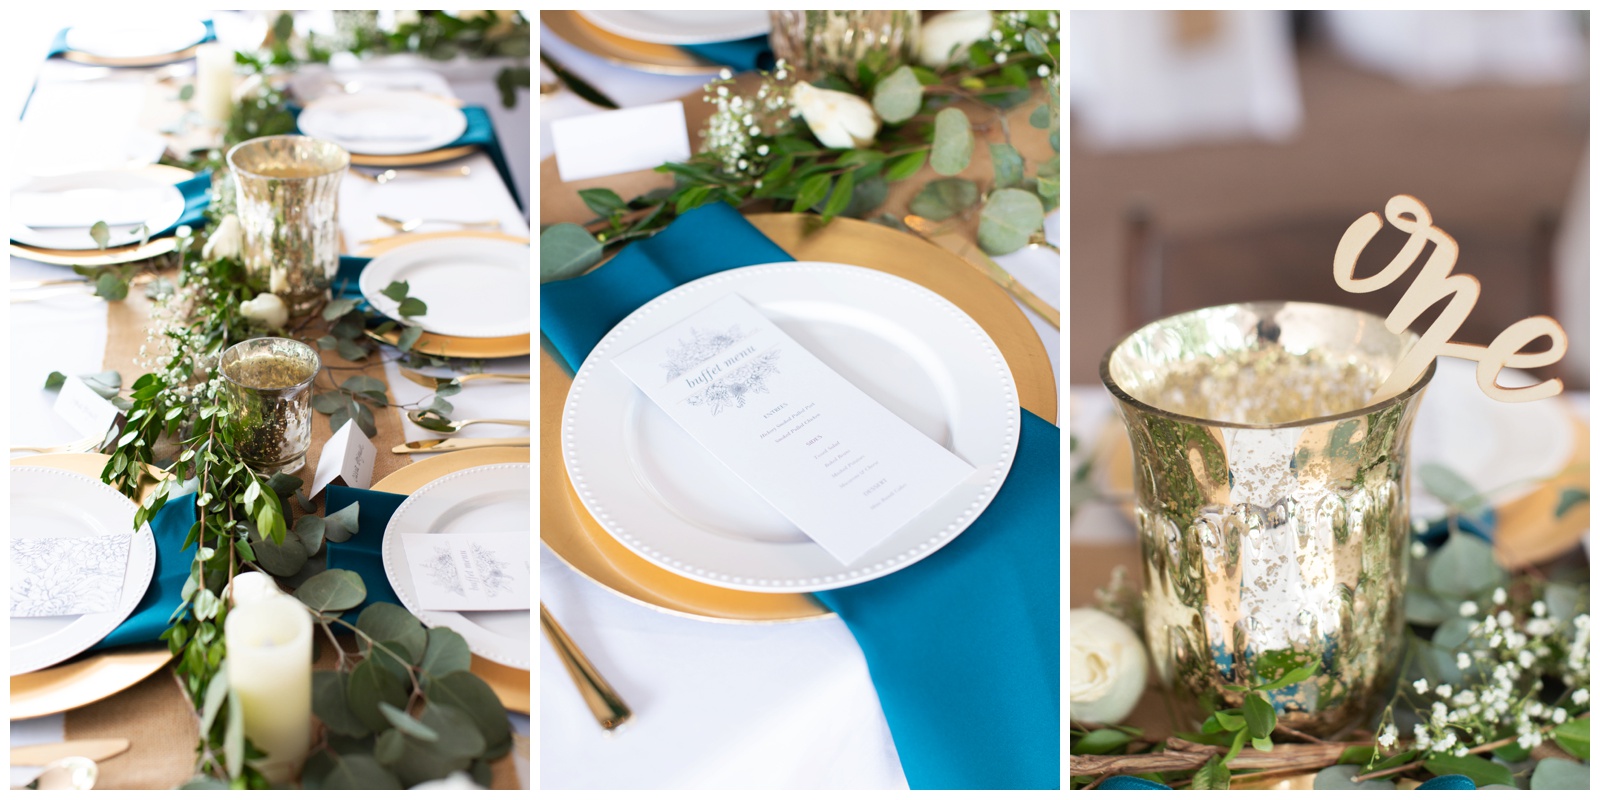 greenery table top decorations photos by riane roberts